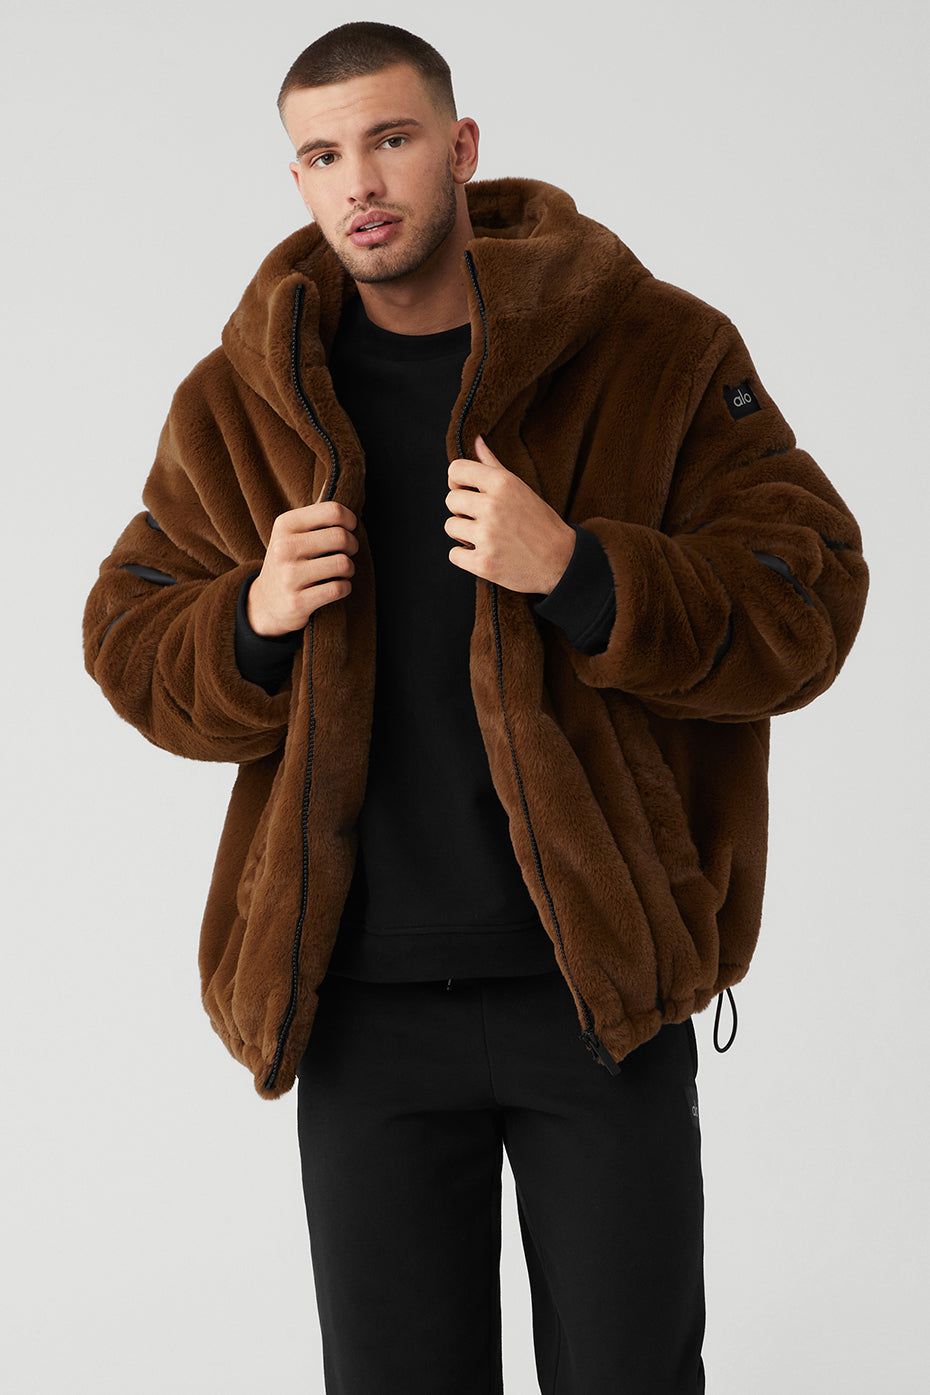 Knock Out Faux Fur Jacket - Chocolate - Chocolate / S